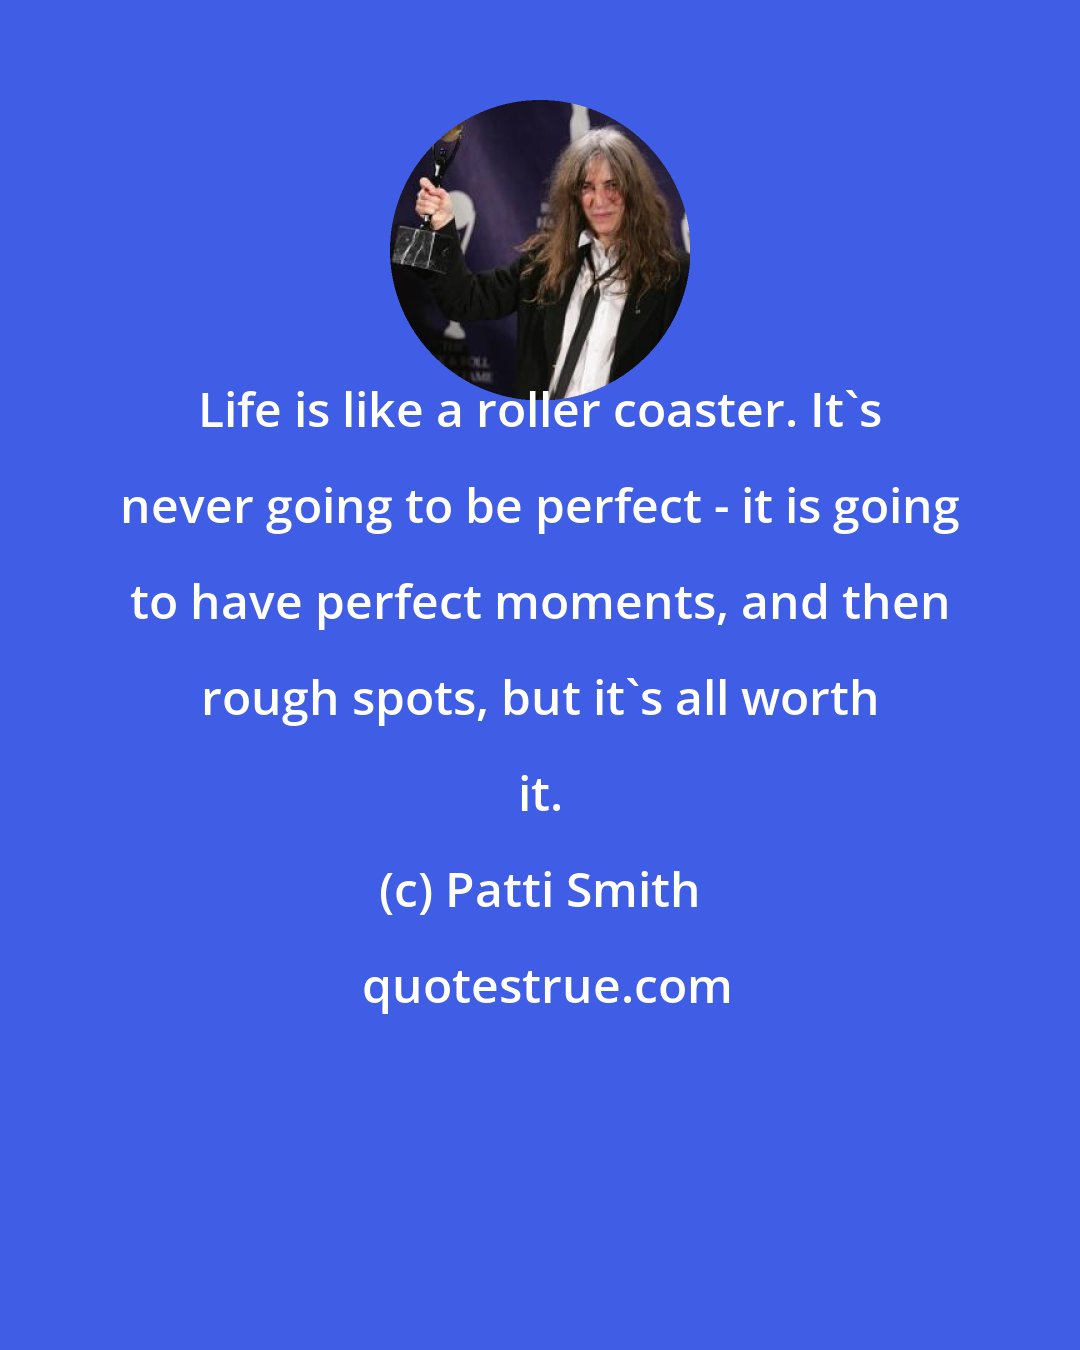 Patti Smith: Life is like a roller coaster. It's never going to be perfect - it is going to have perfect moments, and then rough spots, but it's all worth it.